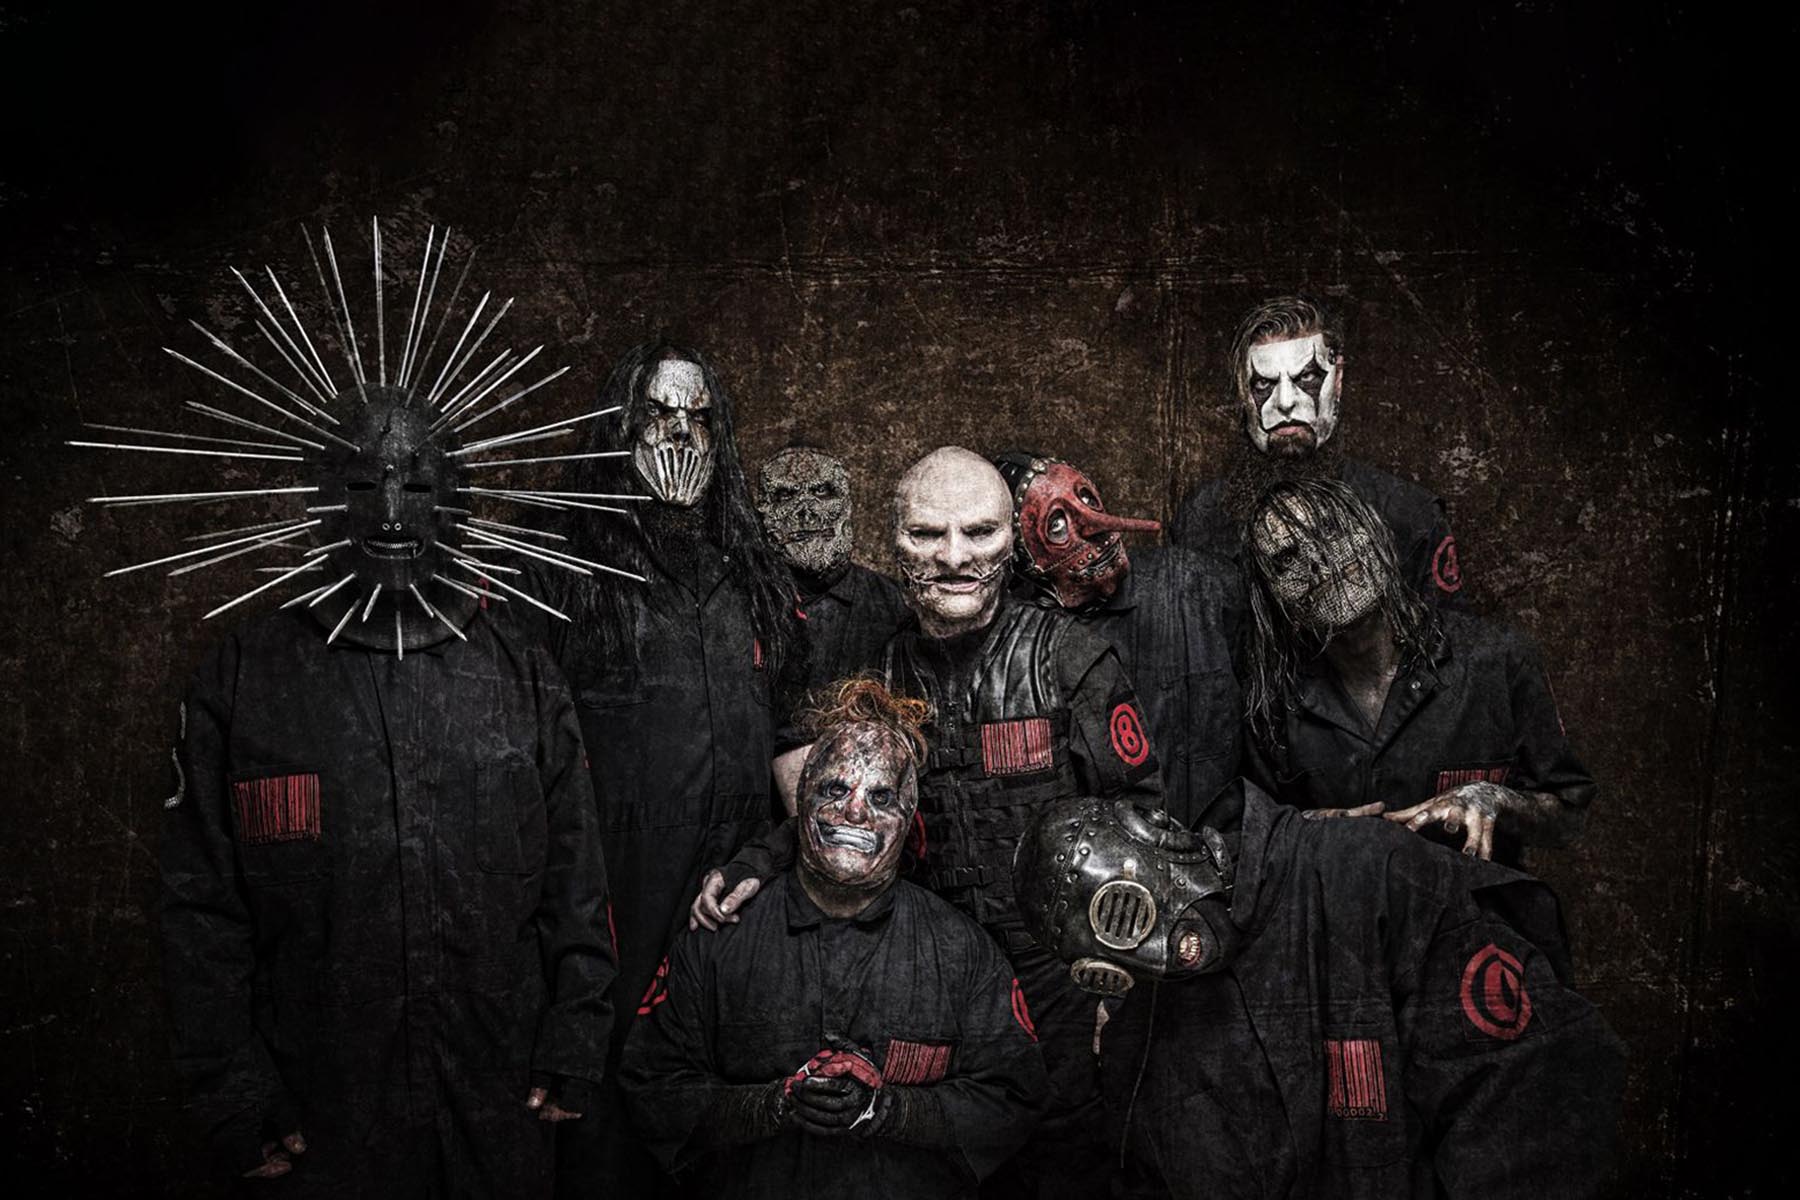 SLIPKNOT Unveils Title Of New "We Are Your Kind" Reveals Official Video for "Unsainted"